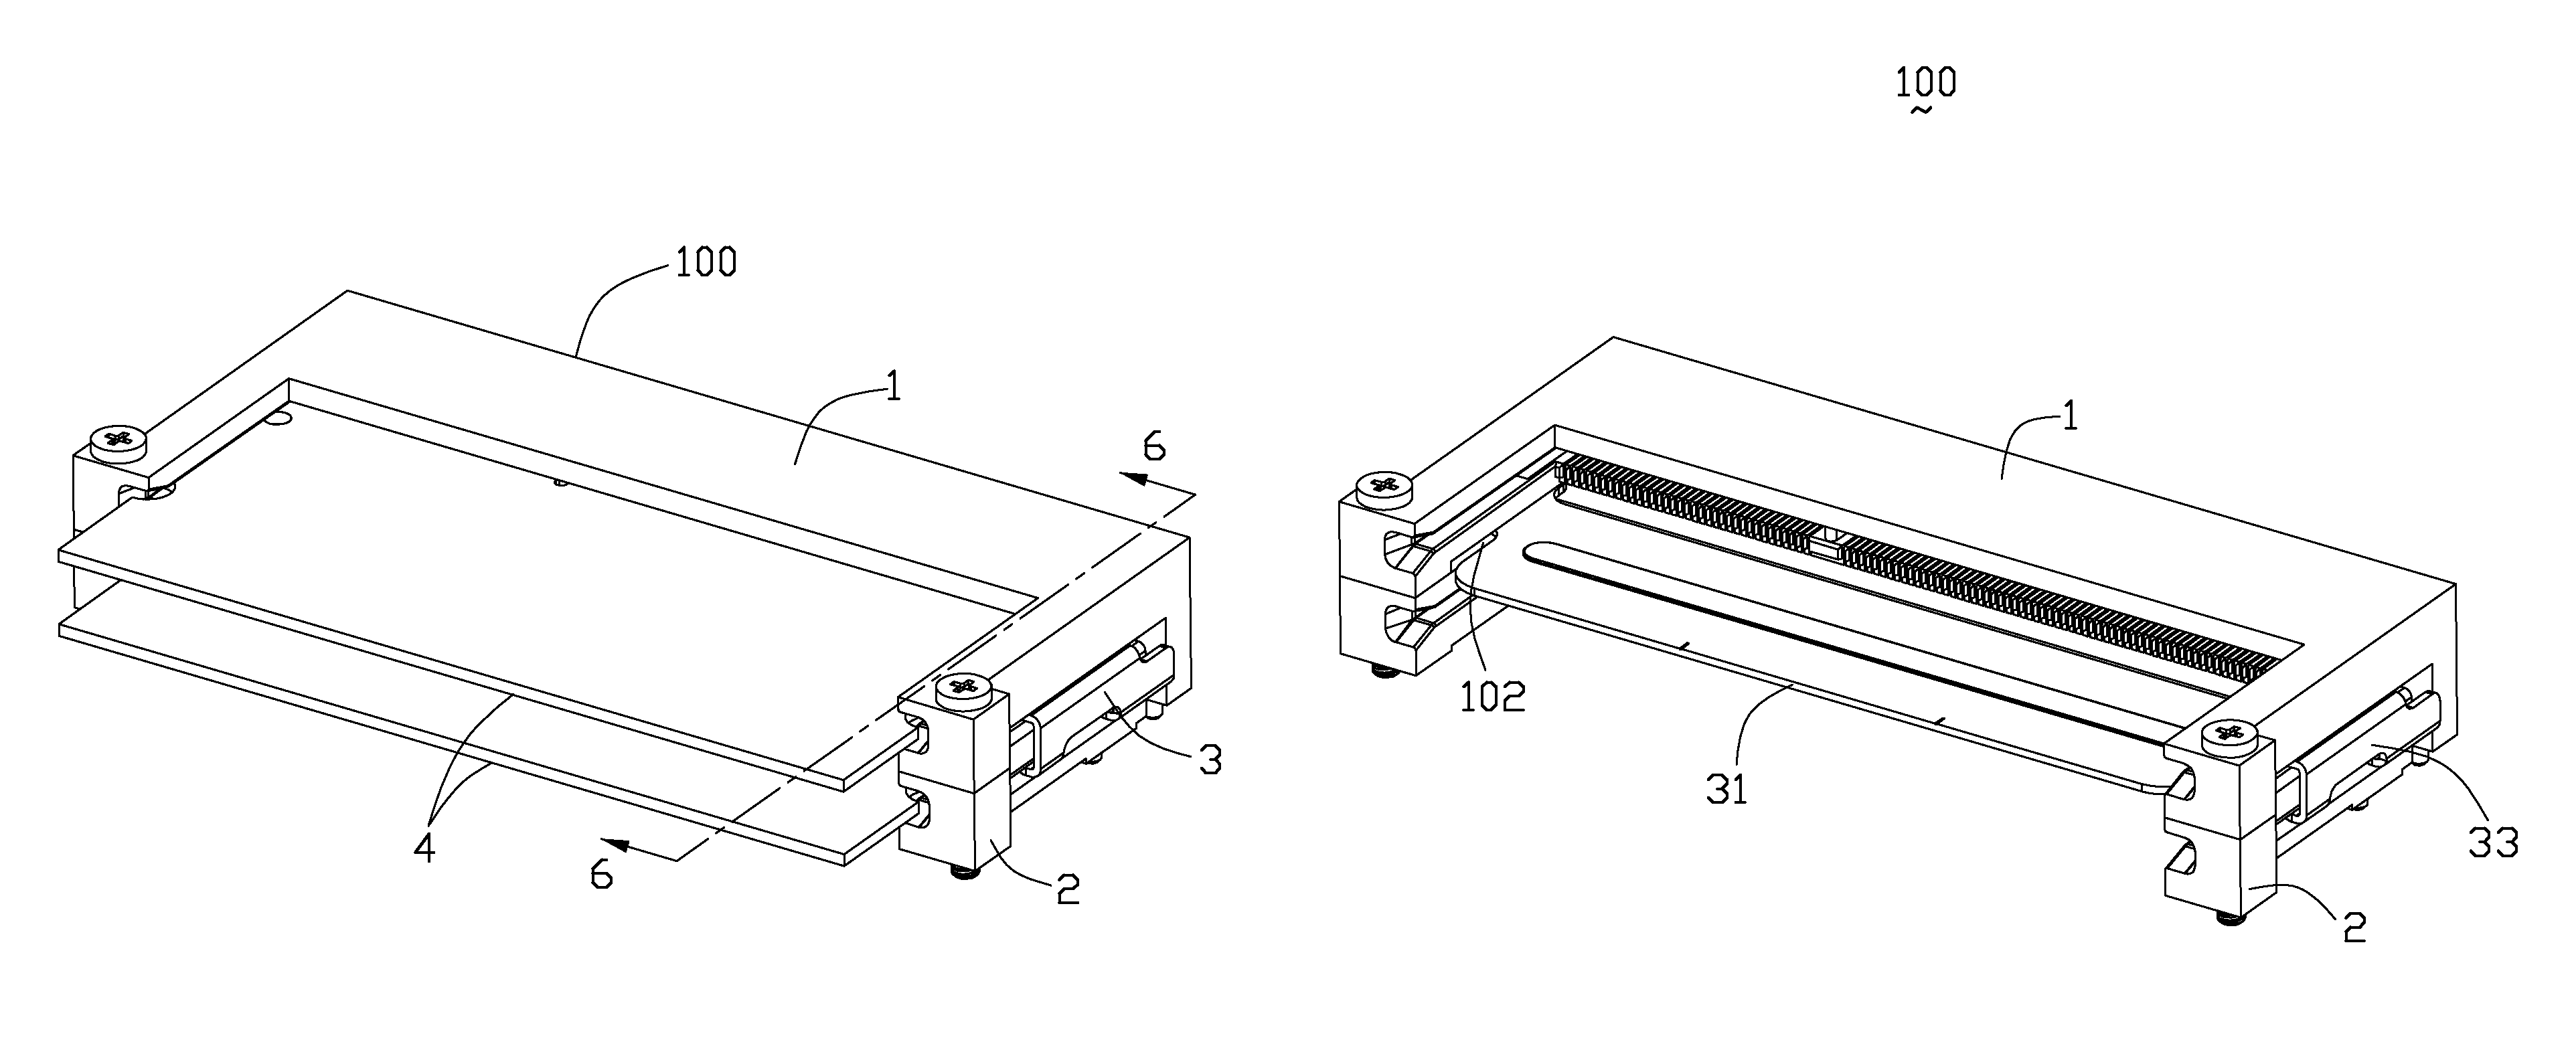 Stacked card edge connector assembly having ejector for removing inserted cards simultaneously